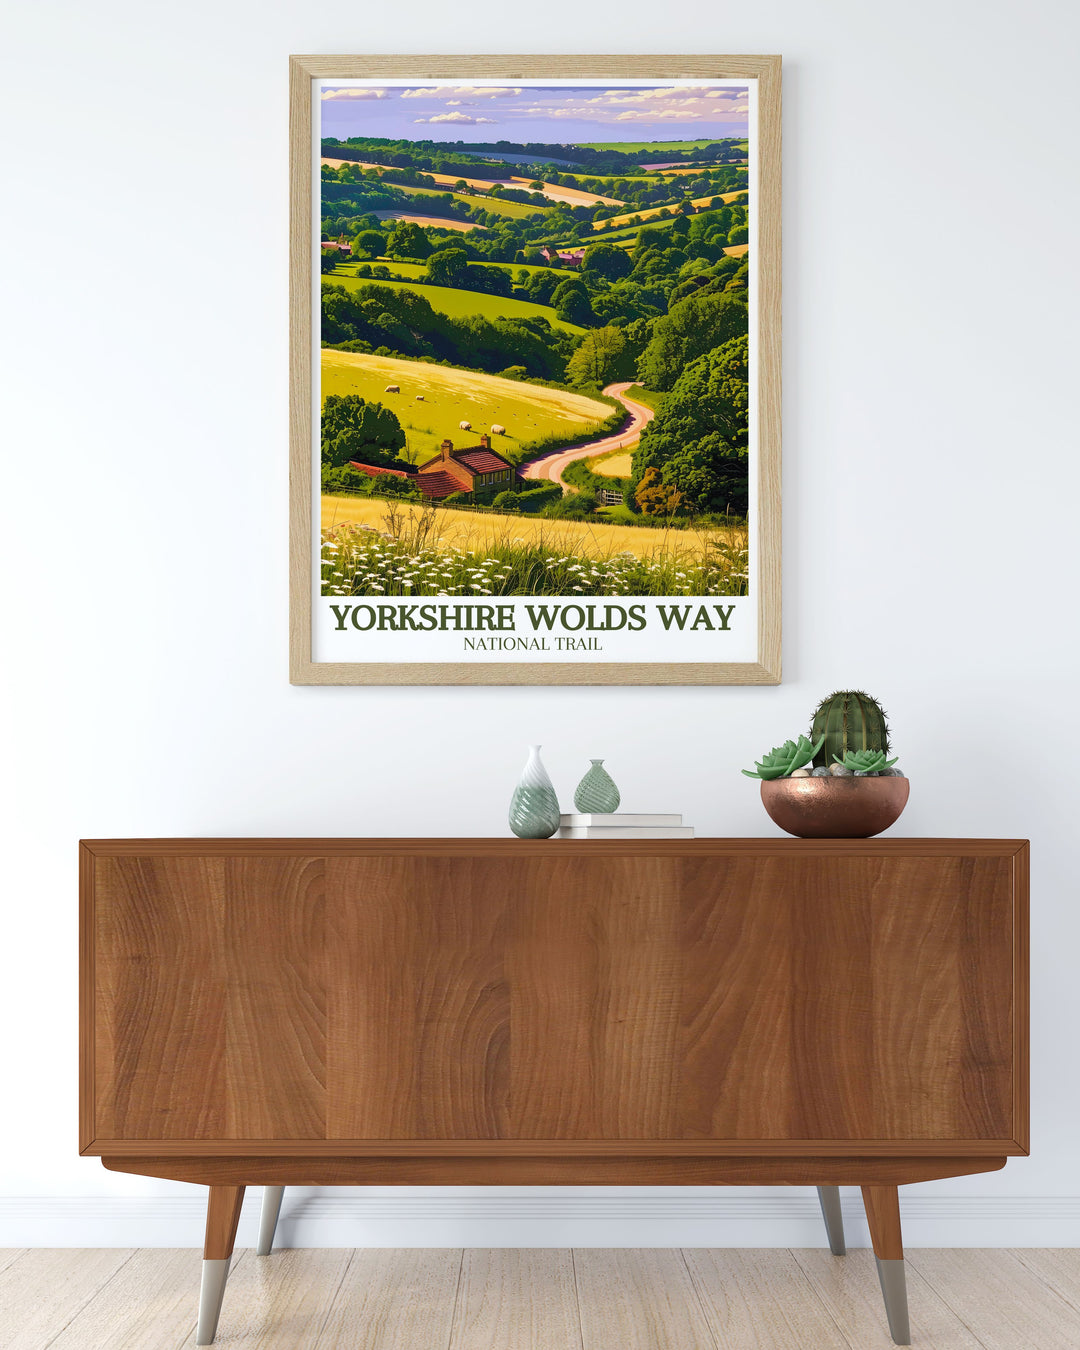 Fine art print of the Yorkshire Wolds Way, showcasing the trails serene beauty and diverse landscapes. A beautiful piece that brings the essence of the UKs national trails into your home decor, ideal for hiking enthusiasts and nature lovers.